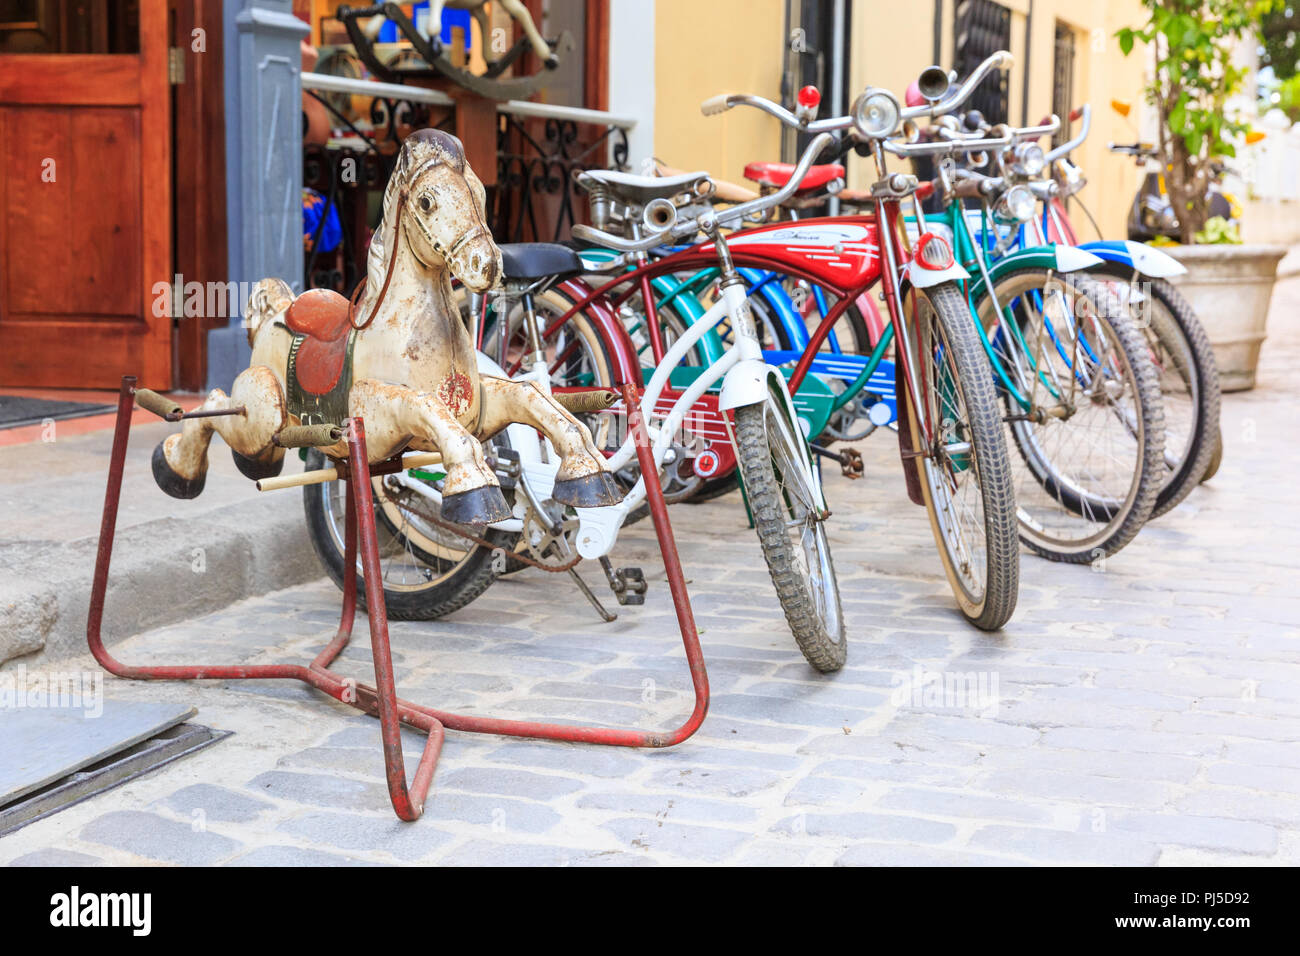 Bicycles, bike rental stand and nostalgic vintage rocking outside a cafe in Havana, Cuba Stock Photo - Alamy